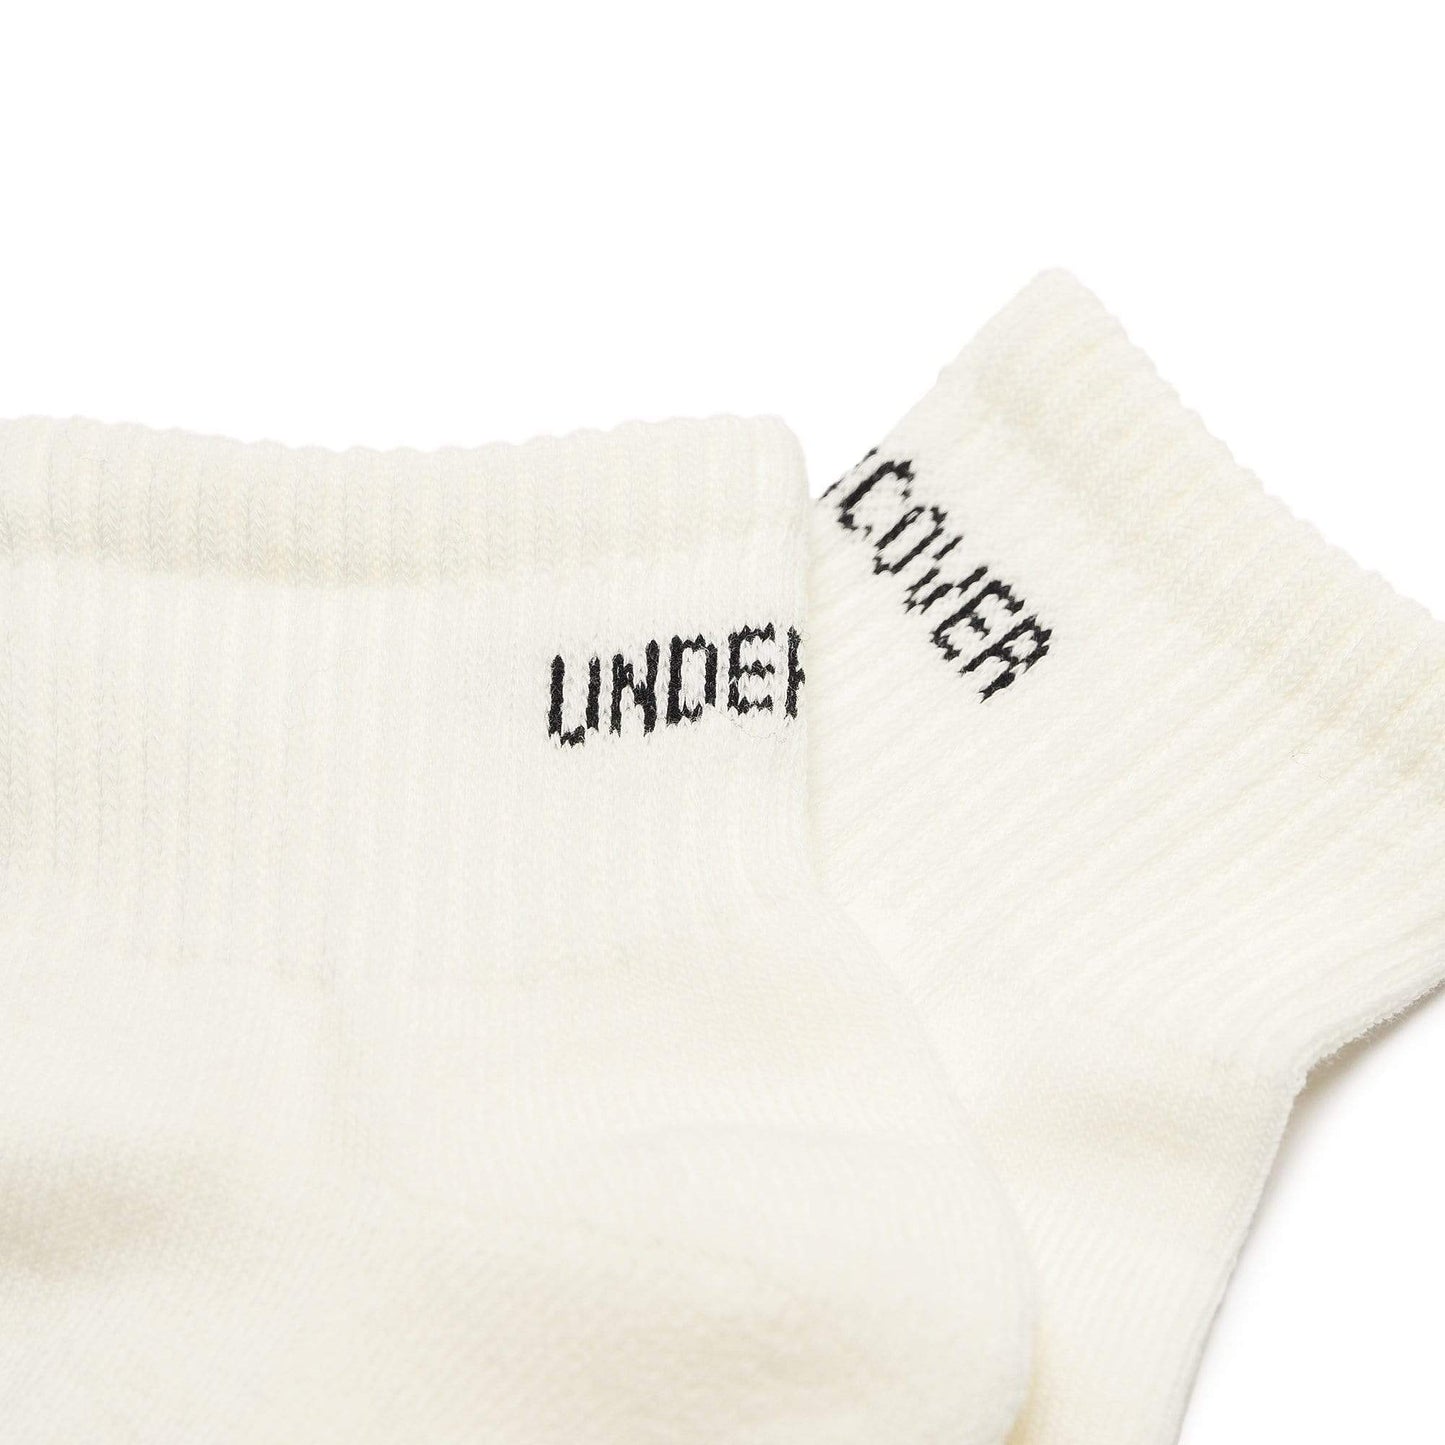 undercover undercover ankle socks (white) UCY4L02-white